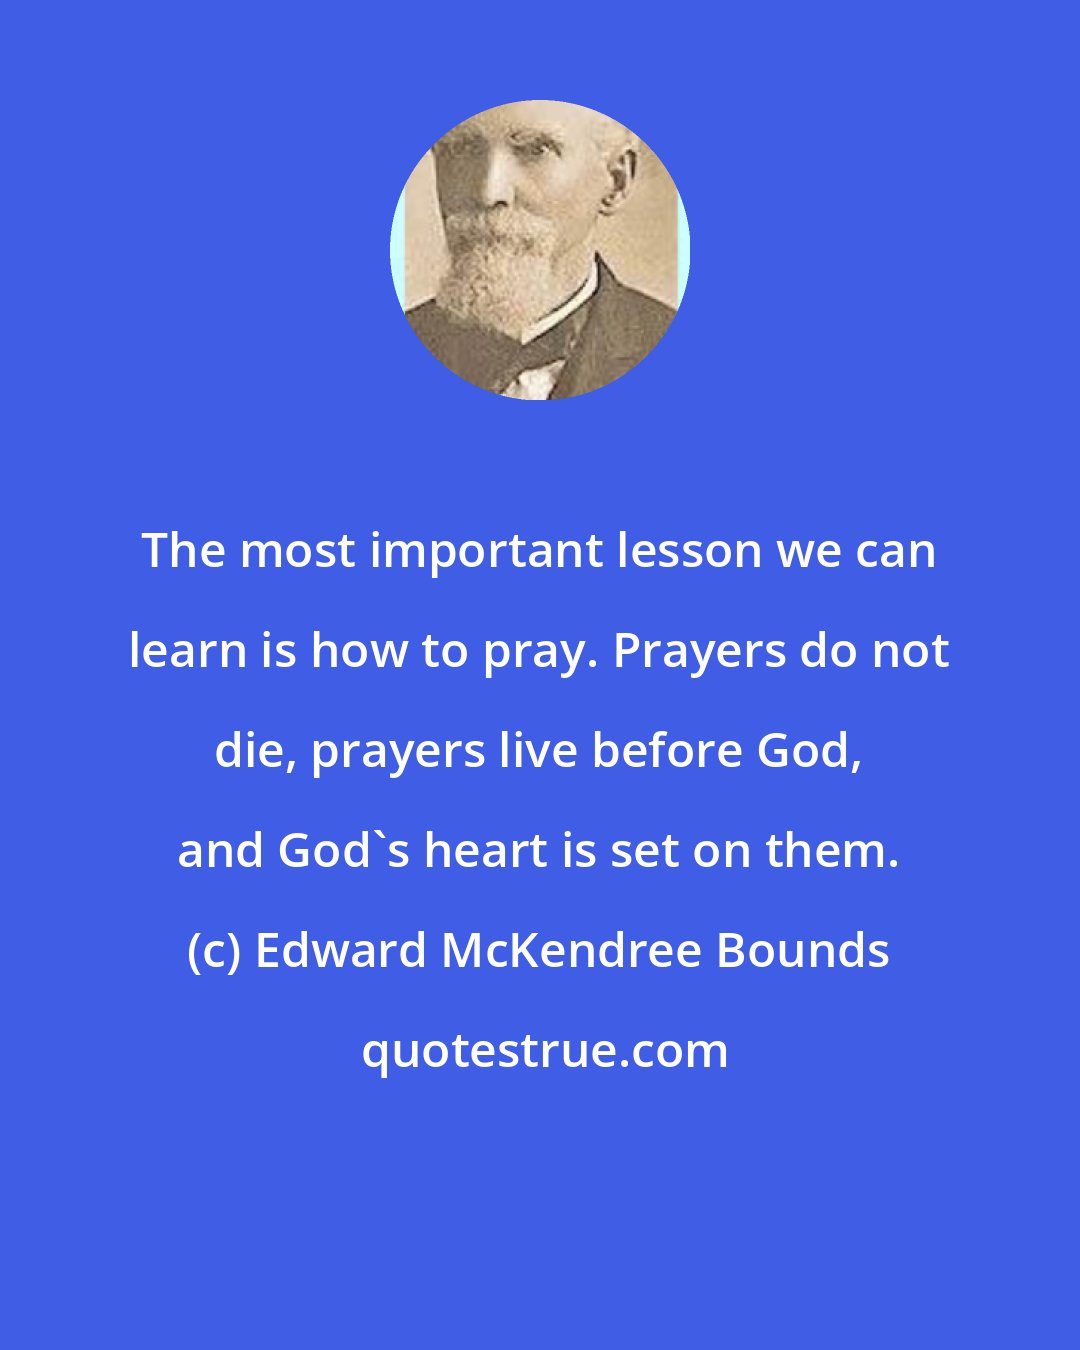 Edward McKendree Bounds: The most important lesson we can learn is how to pray. Prayers do not die, prayers live before God, and God's heart is set on them.